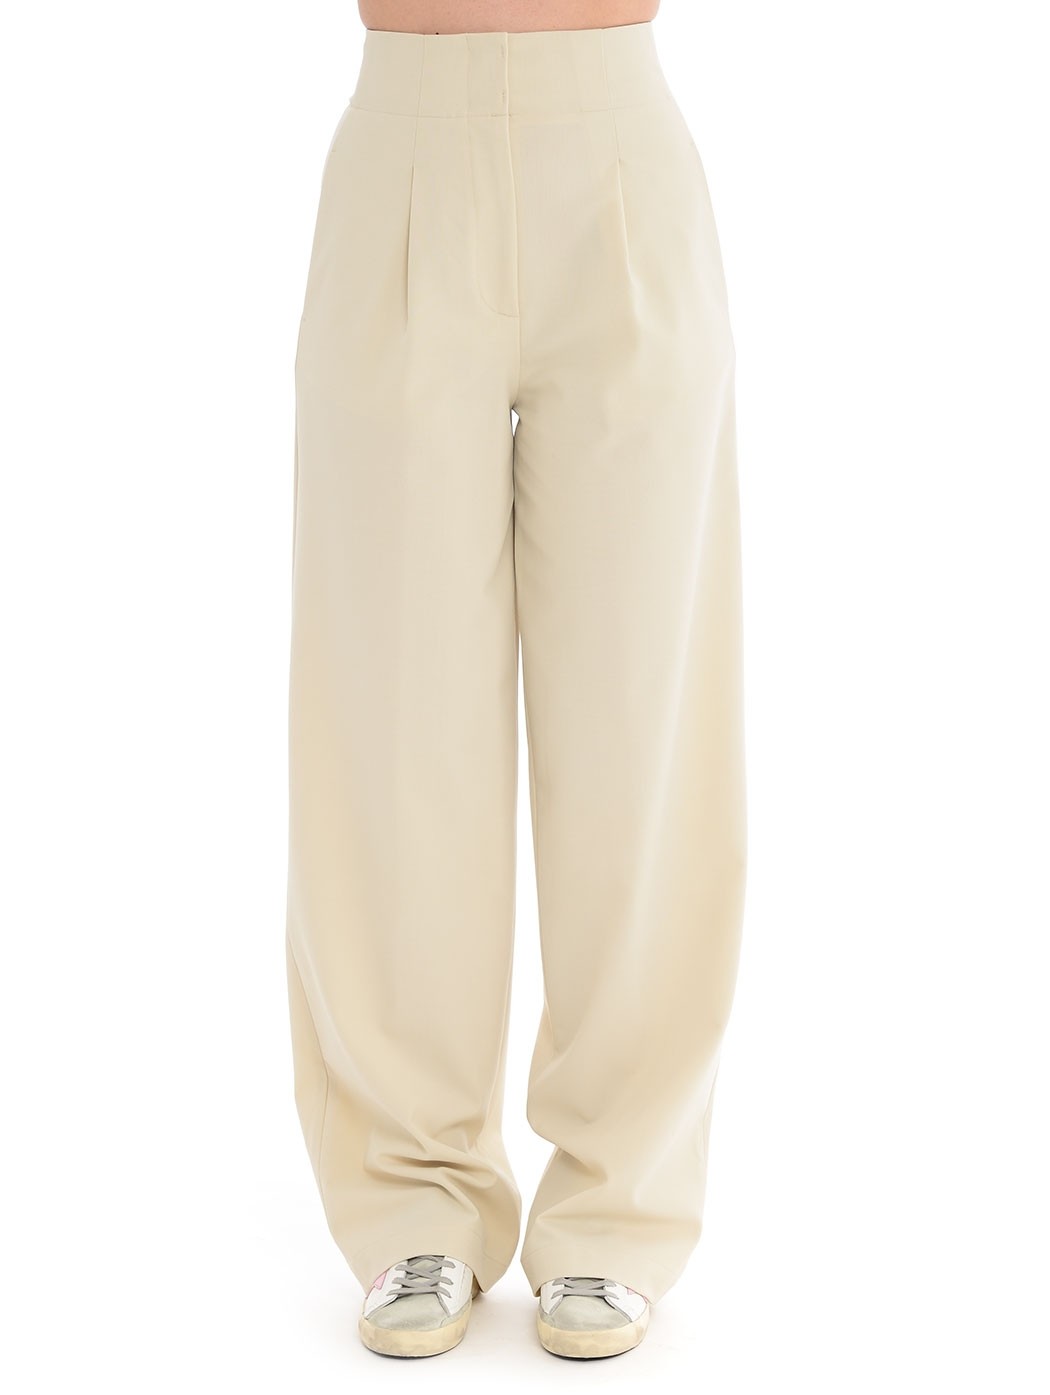  WOMAN TROUSERS,PALAZZO TROUSERS,SKINNY TROUSERS,MARNI TROUSERS,FORTE FORTE TROUSERS,8PM TROUSERS,MSGM TROUSERS,CROP PANTS  SEMICOUTURE Y3SI05